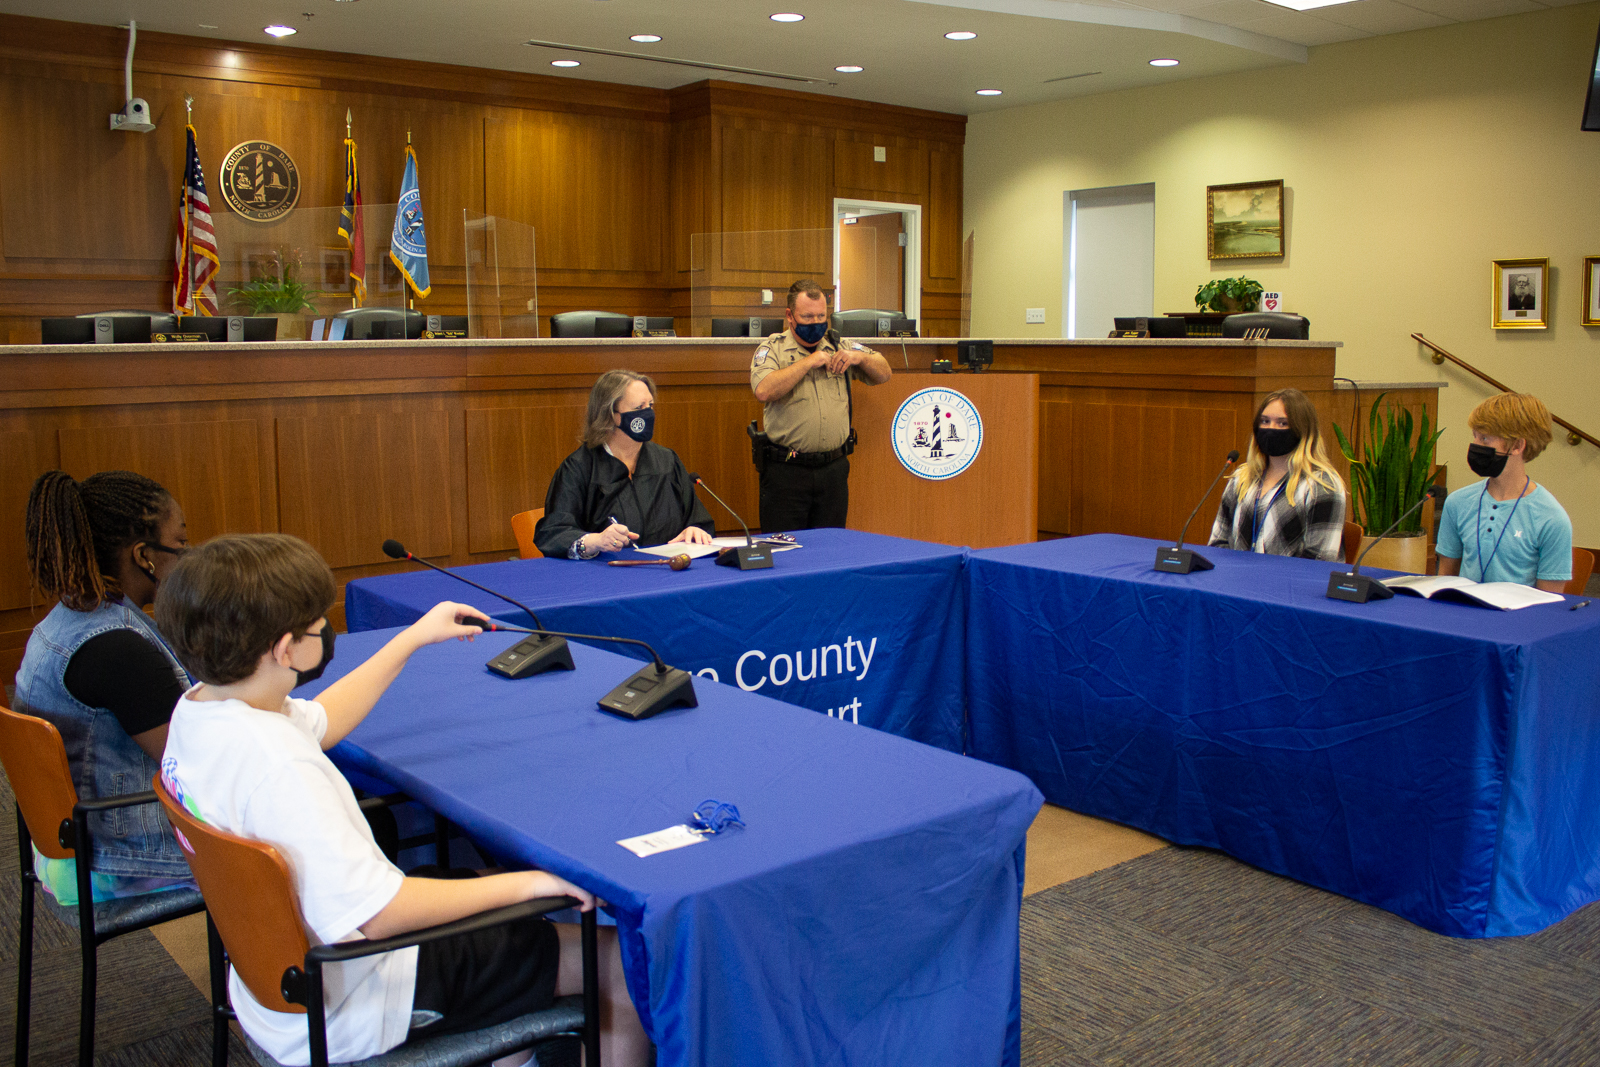 Image of teen court trial. Four students and a judge sit at tables.